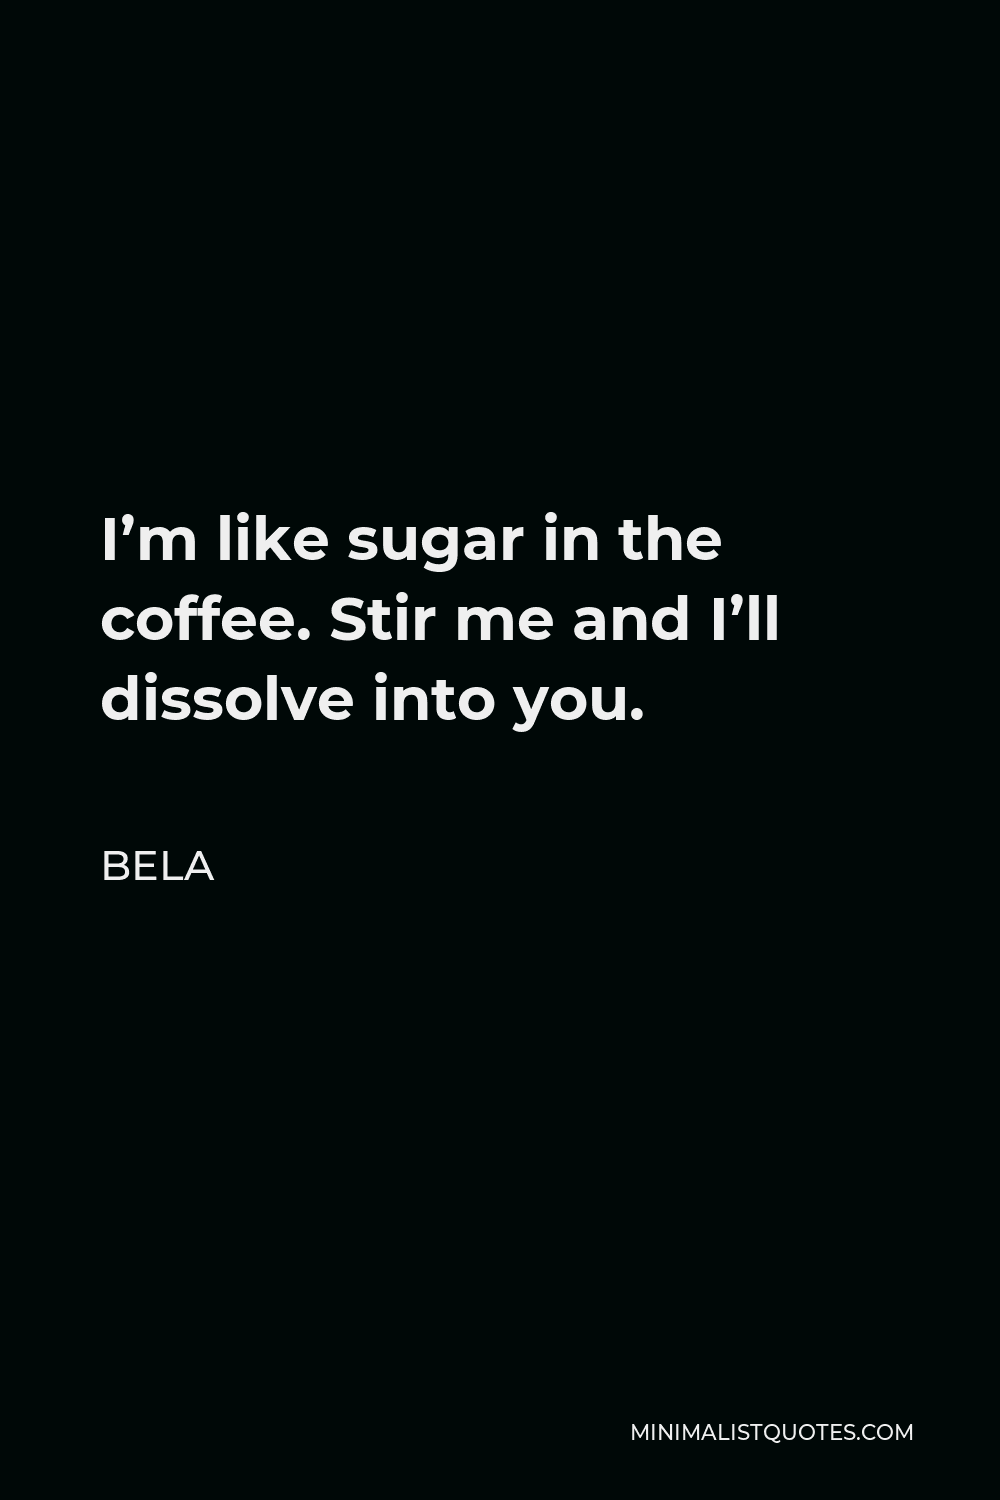 Bela Quote - I’m like sugar in the coffee. Stir me and I’ll dissolve into you.